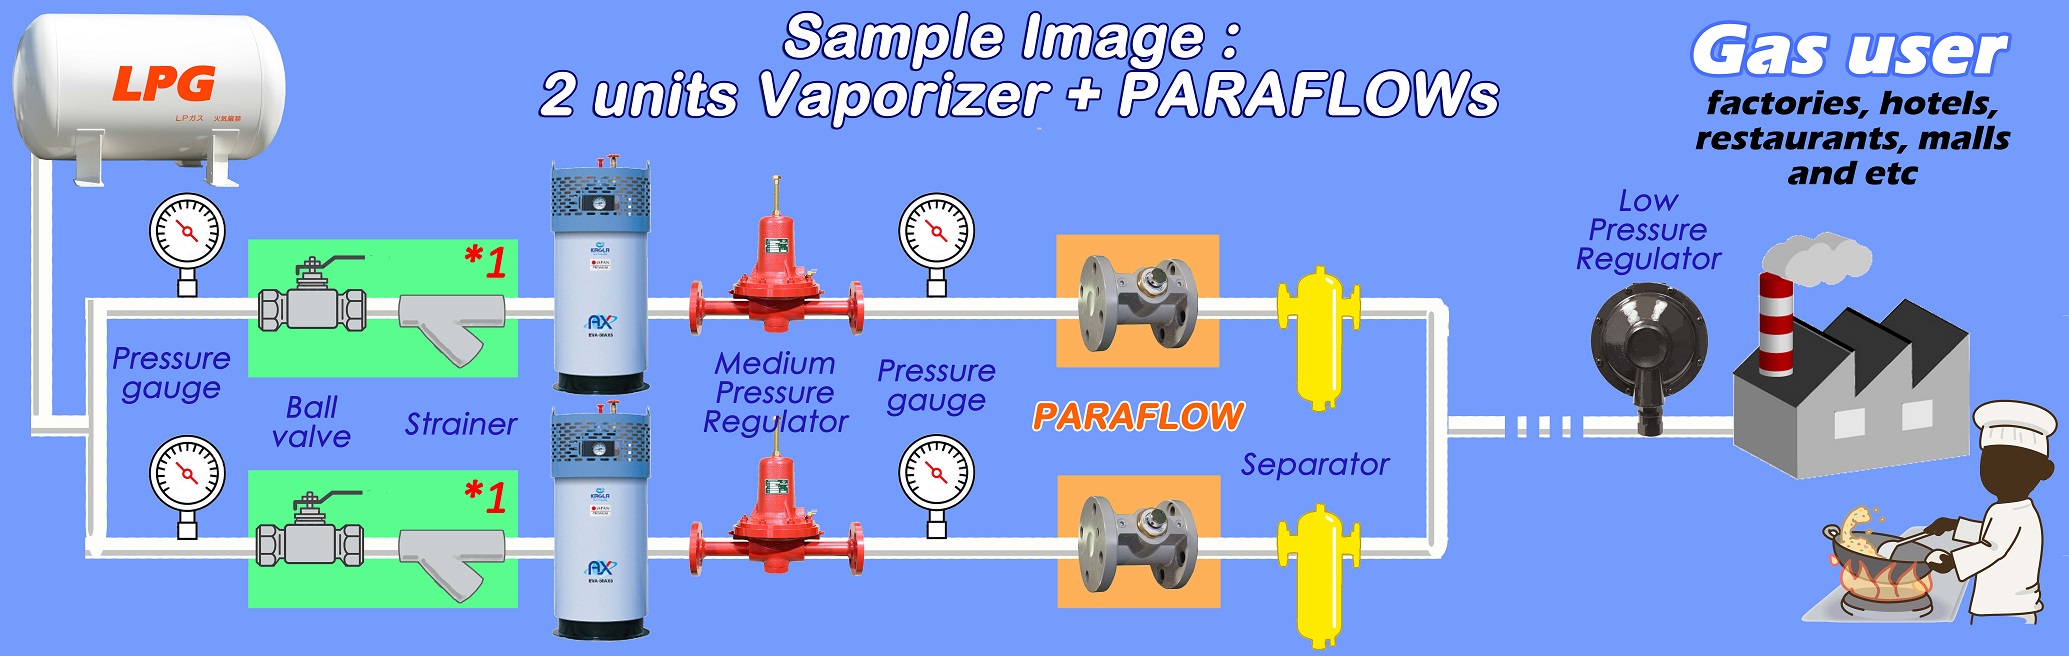 Installation image of PARAFLOW for simultaneous operation of multiple vaporizers